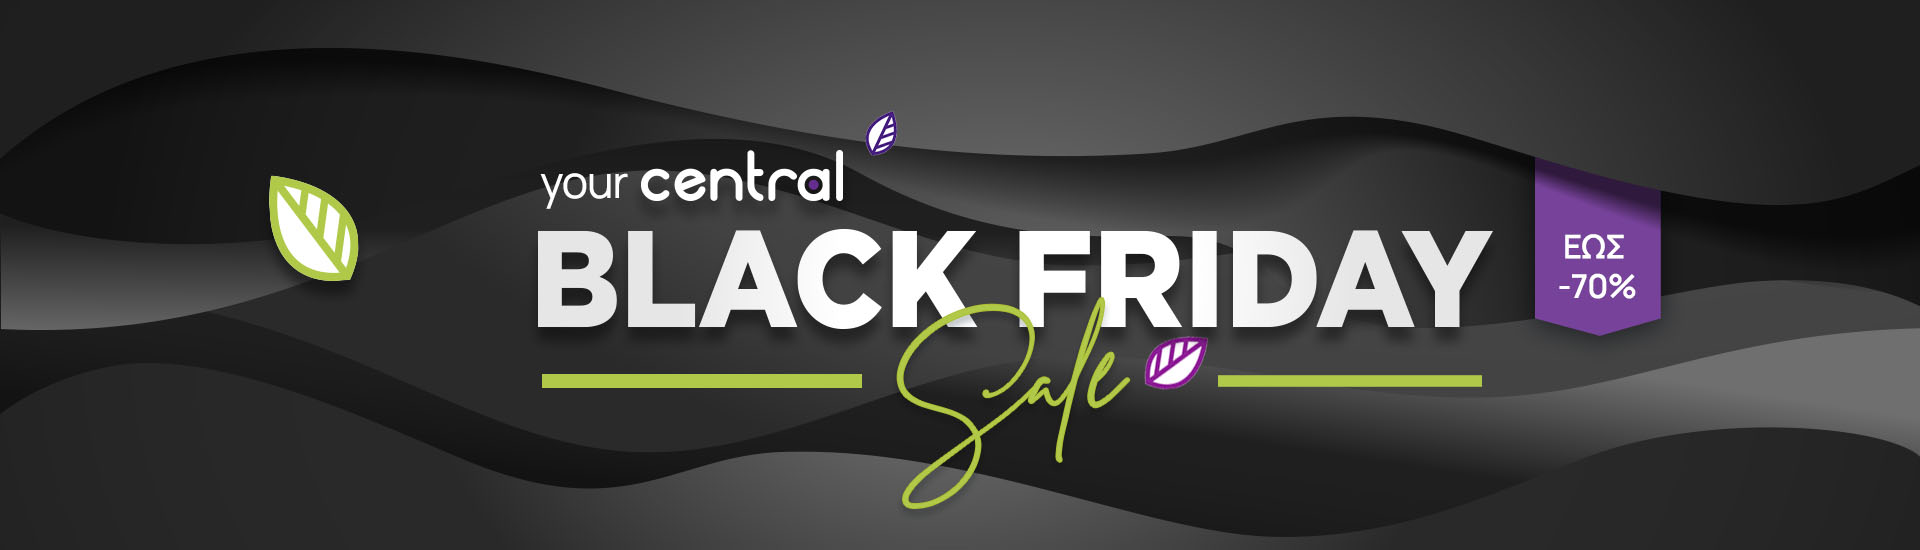 Your Central Black Friday Sale Έως -70%!